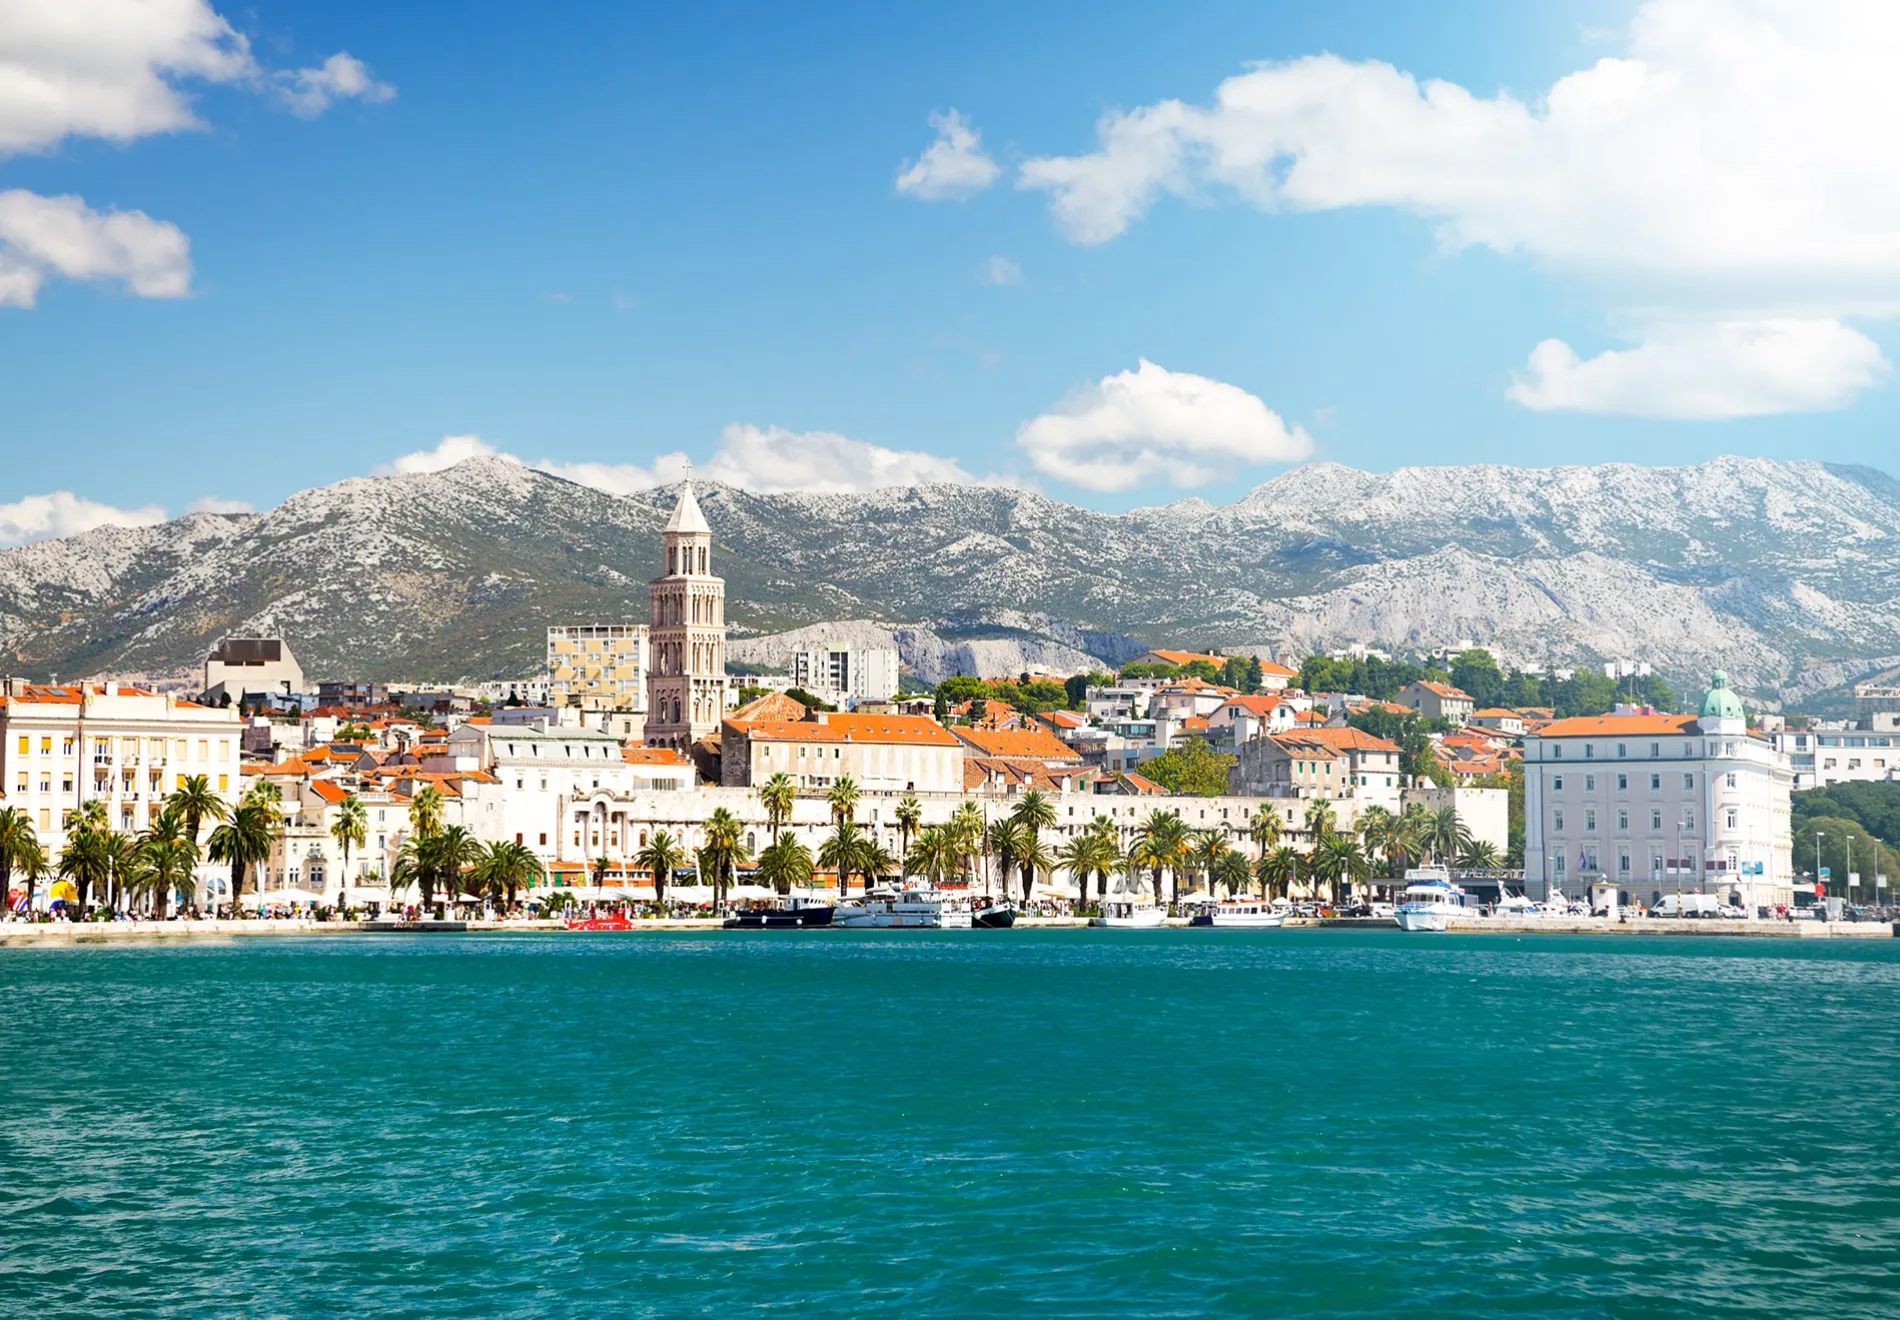 With the assistance of a wonderful travel agency based in Split as well as the crews